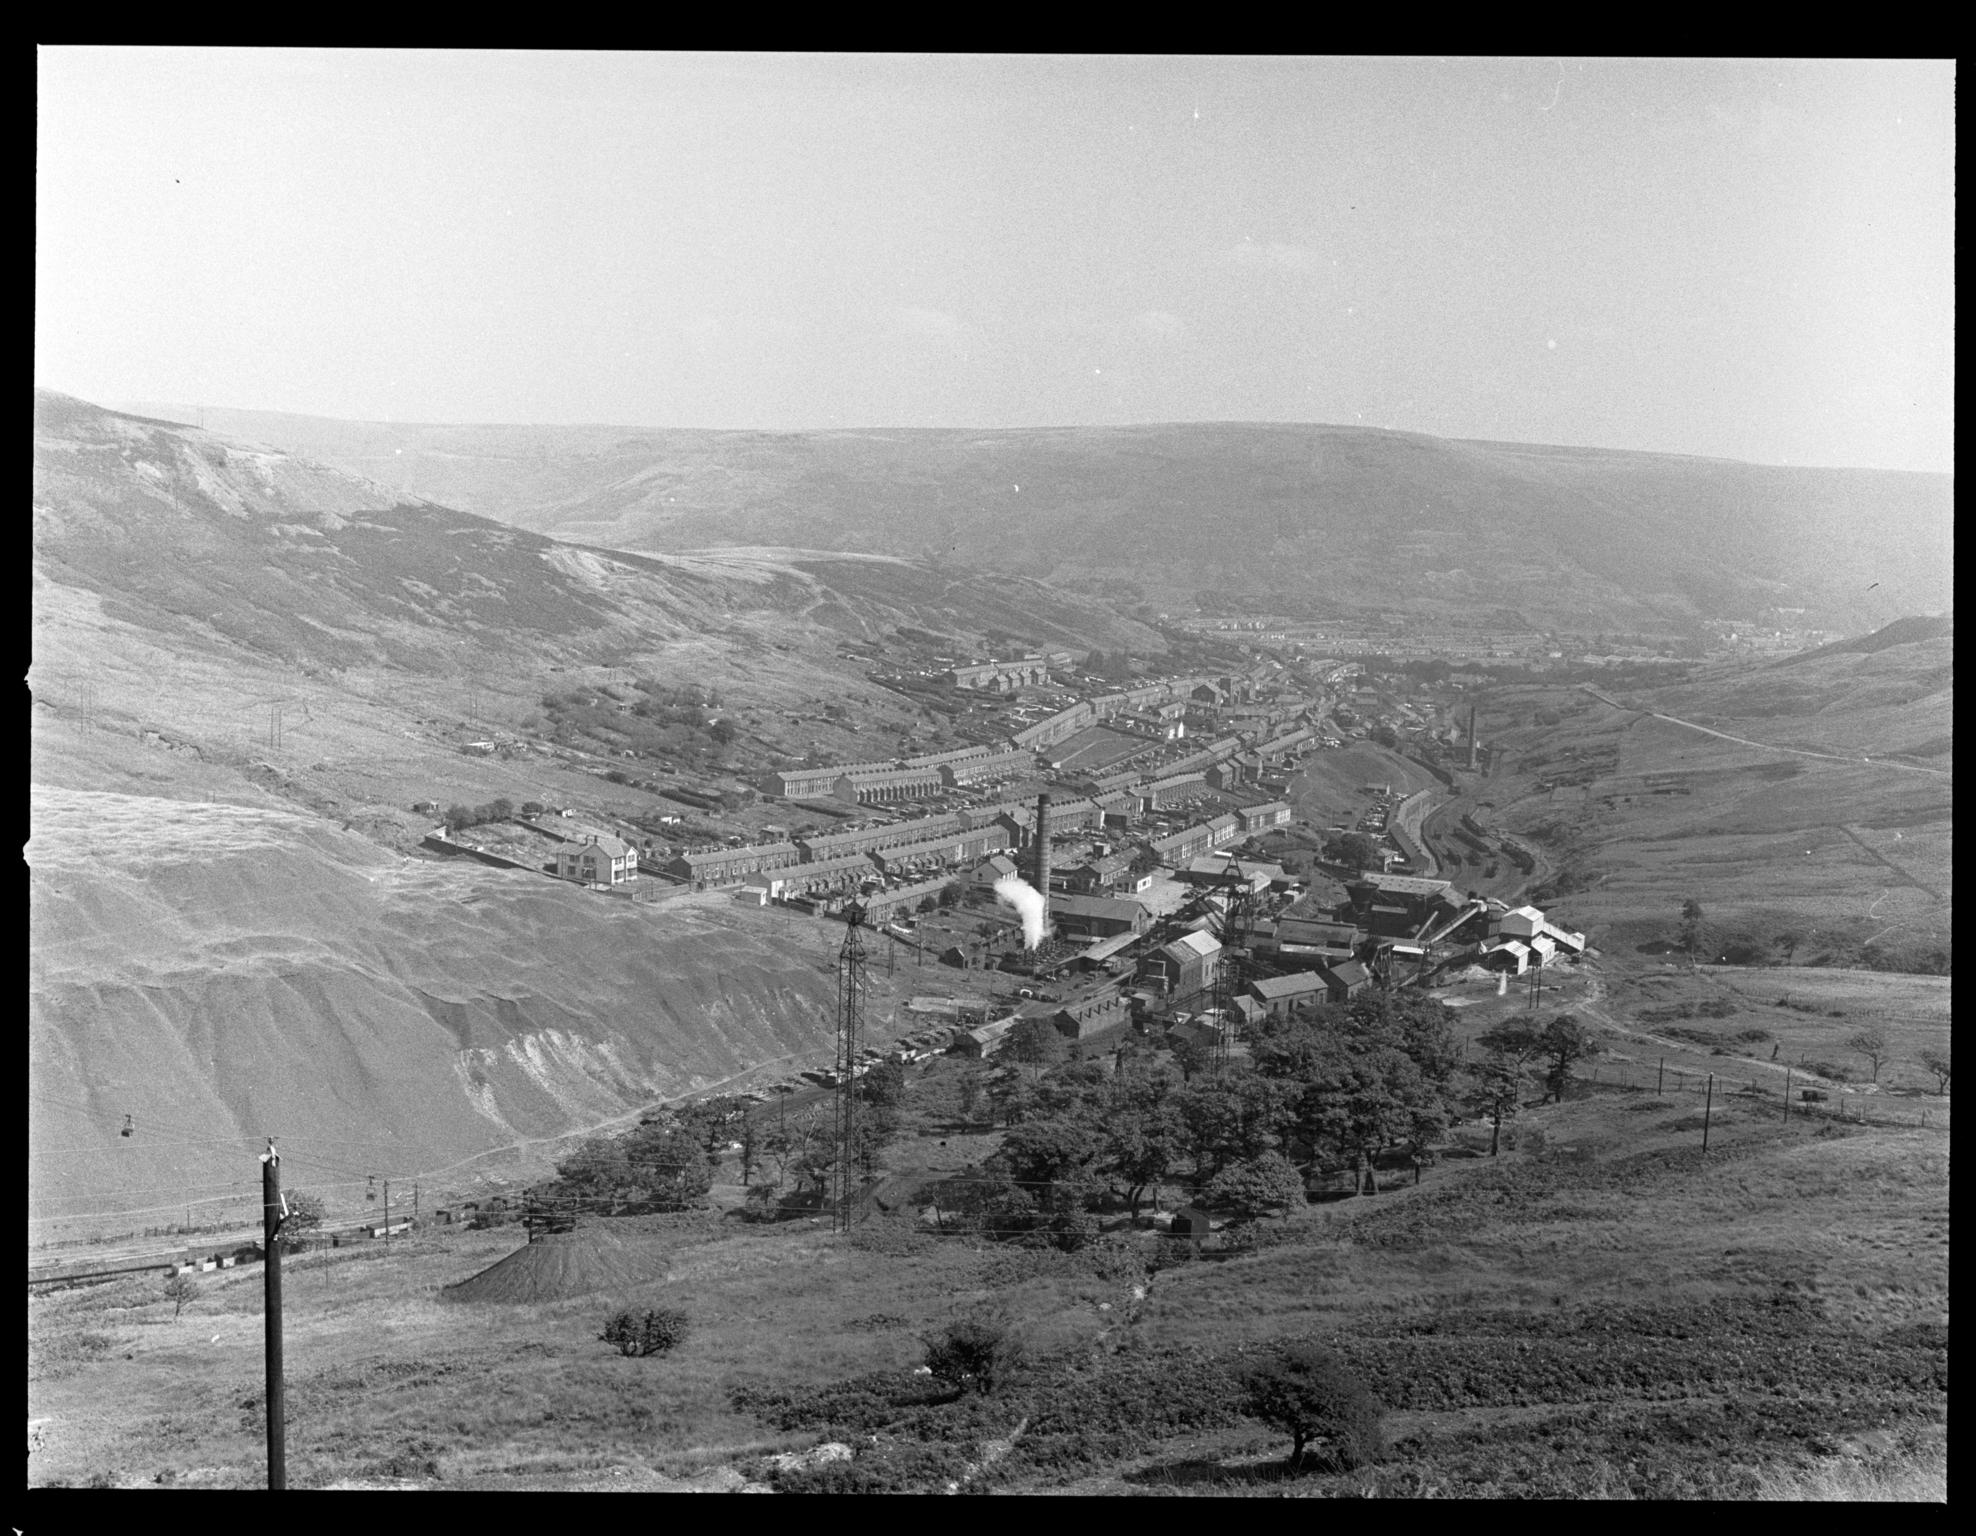 Park and Dare Colliery, film negative